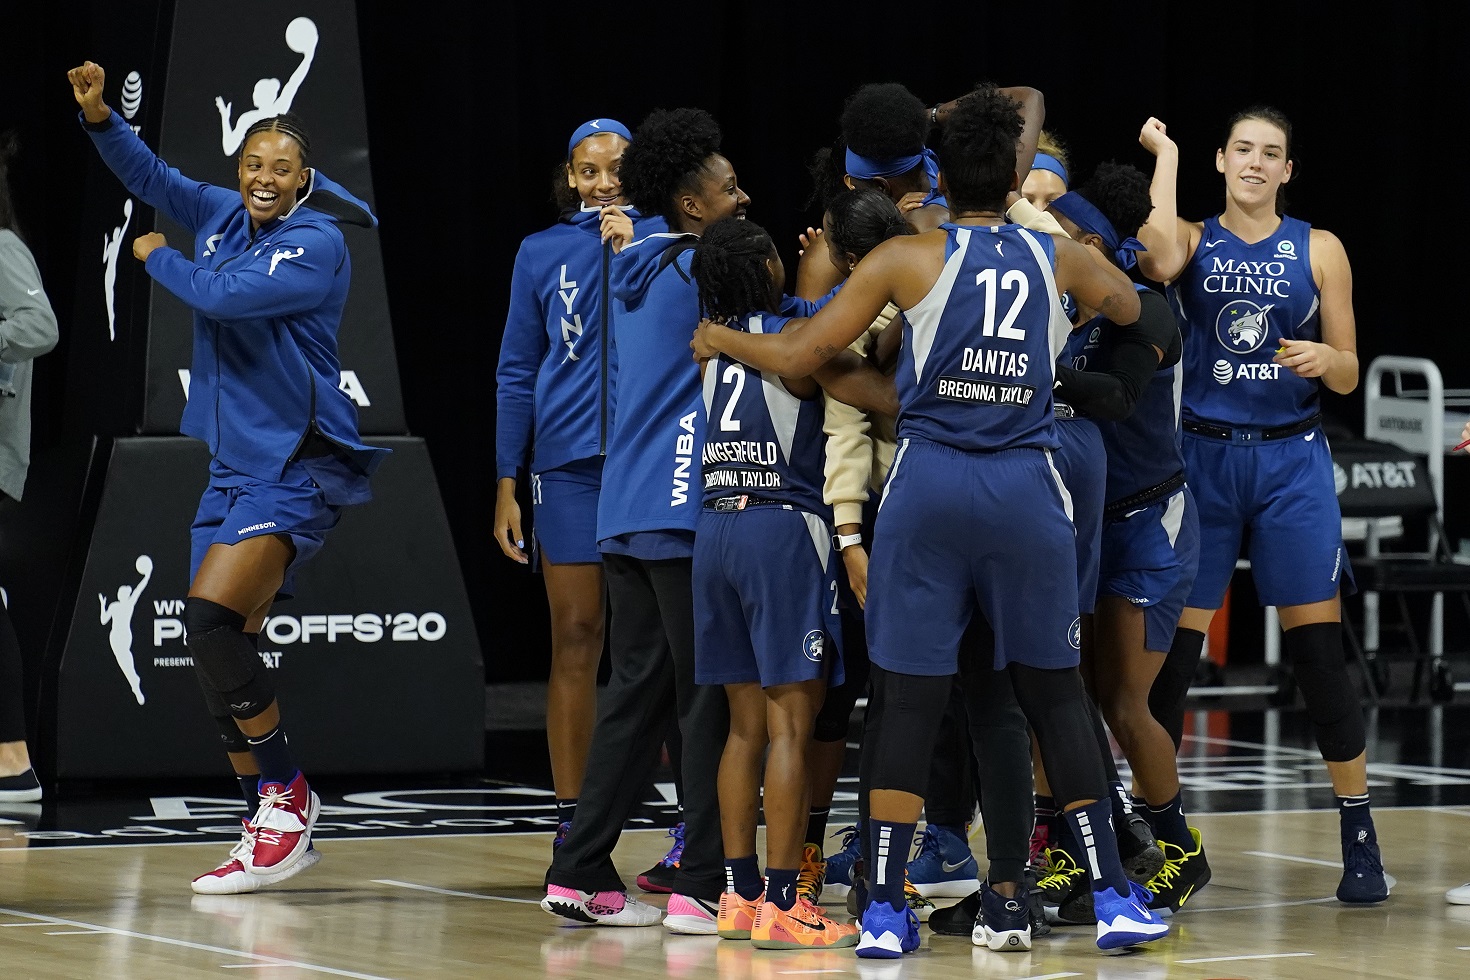 WNBA postpones game between Storm and Lynx due to COVID-19